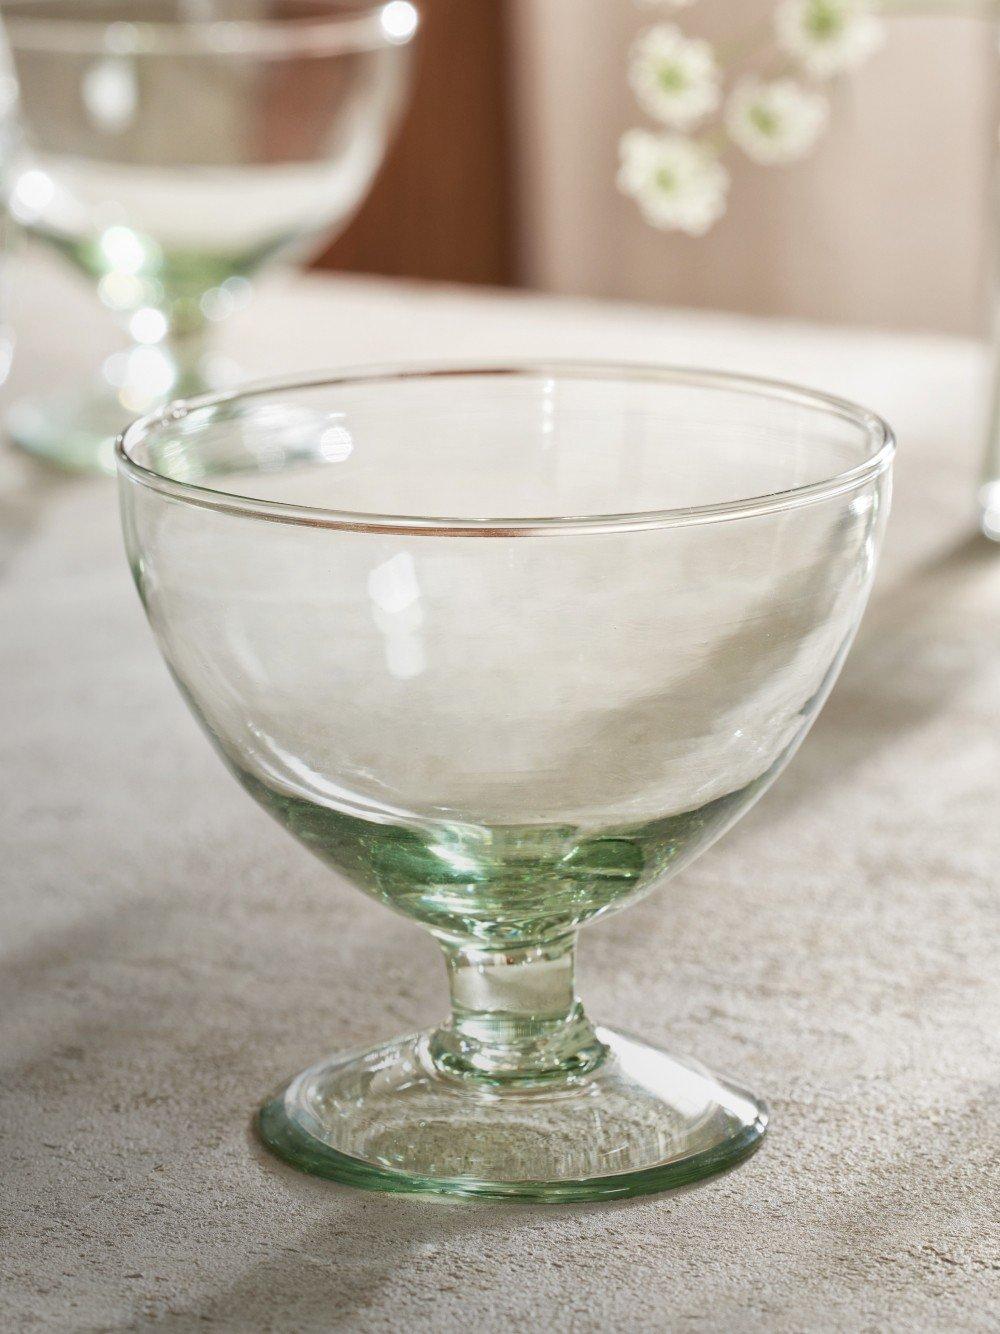 a glass bowl sitting on a table with a flower vase